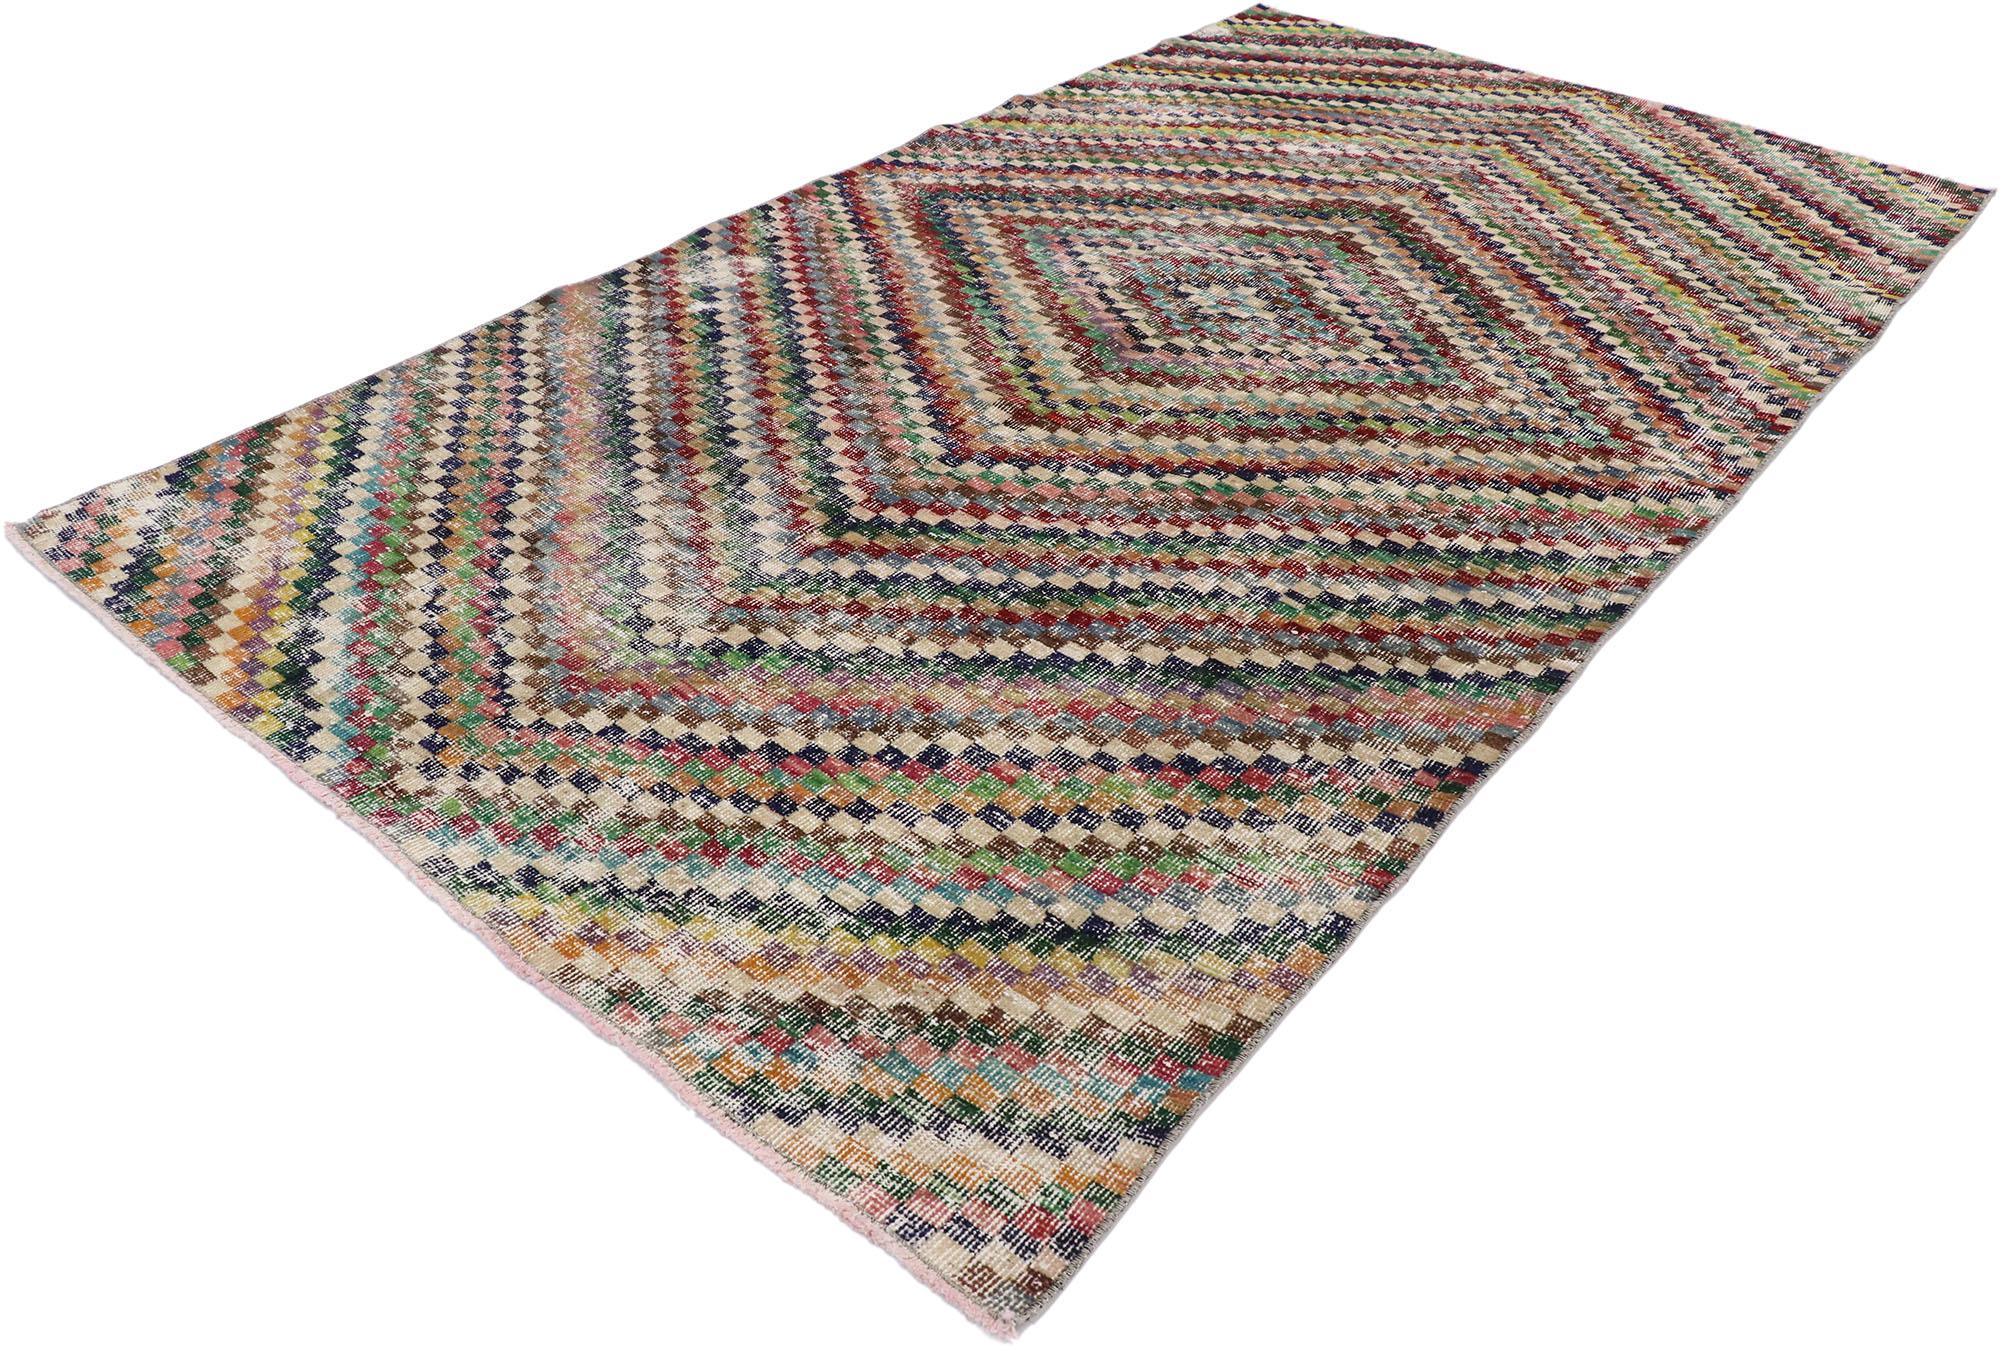 53309, distressed vintage Turkish Sivas runner with Mid-Century Modern rustic style. This hand knotted wool distressed vintage Turkish Sivas rug features an all-over checkered diamond pattern comprised of rows of multicolored cubes. Each row of